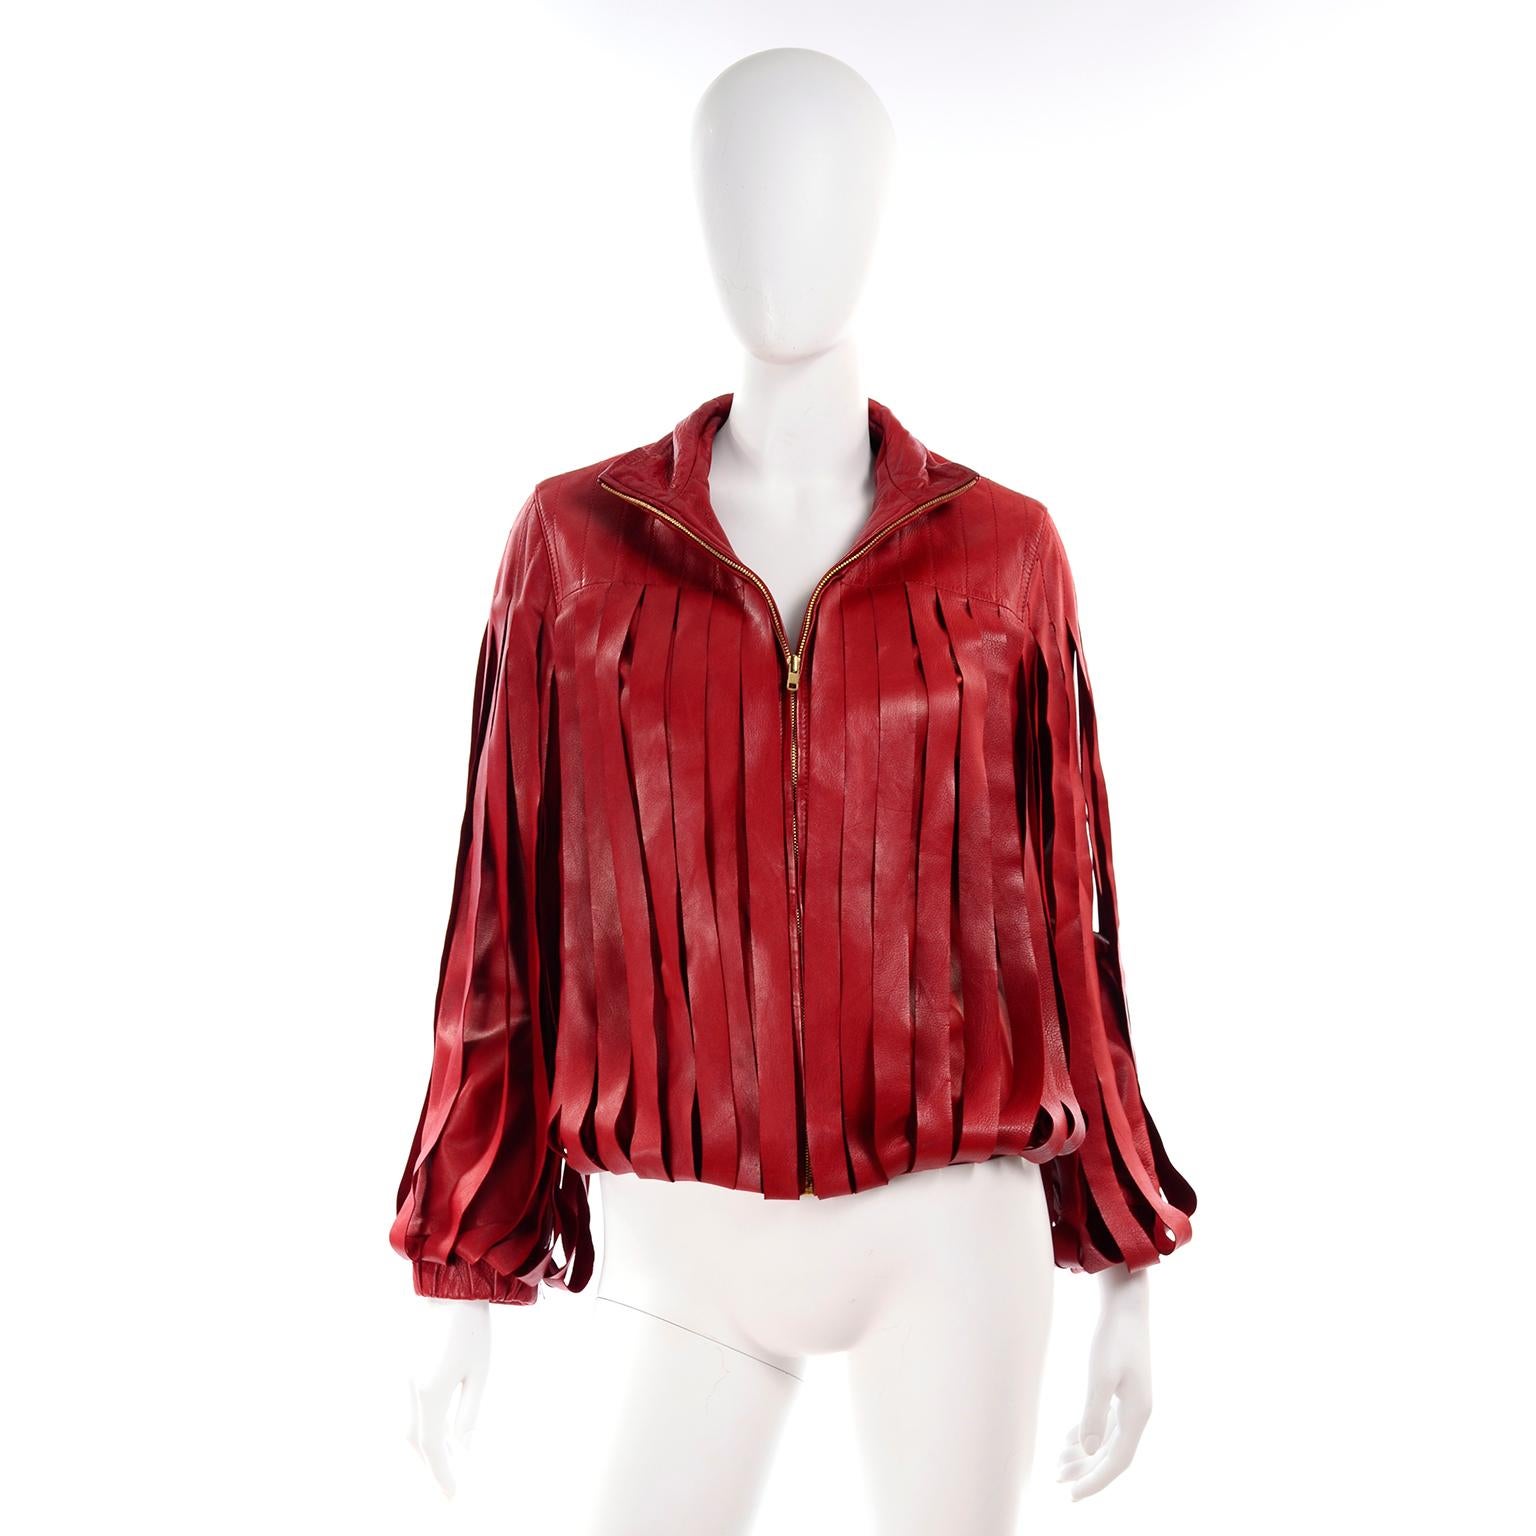 This is an outstanding Bottega Veneta burgundy red leather jacket with gorgeous fringe style panels.  This is probably one of our favorite leather jackets of all time! The coat zips up the front and has topstitching on the upper portion of the front